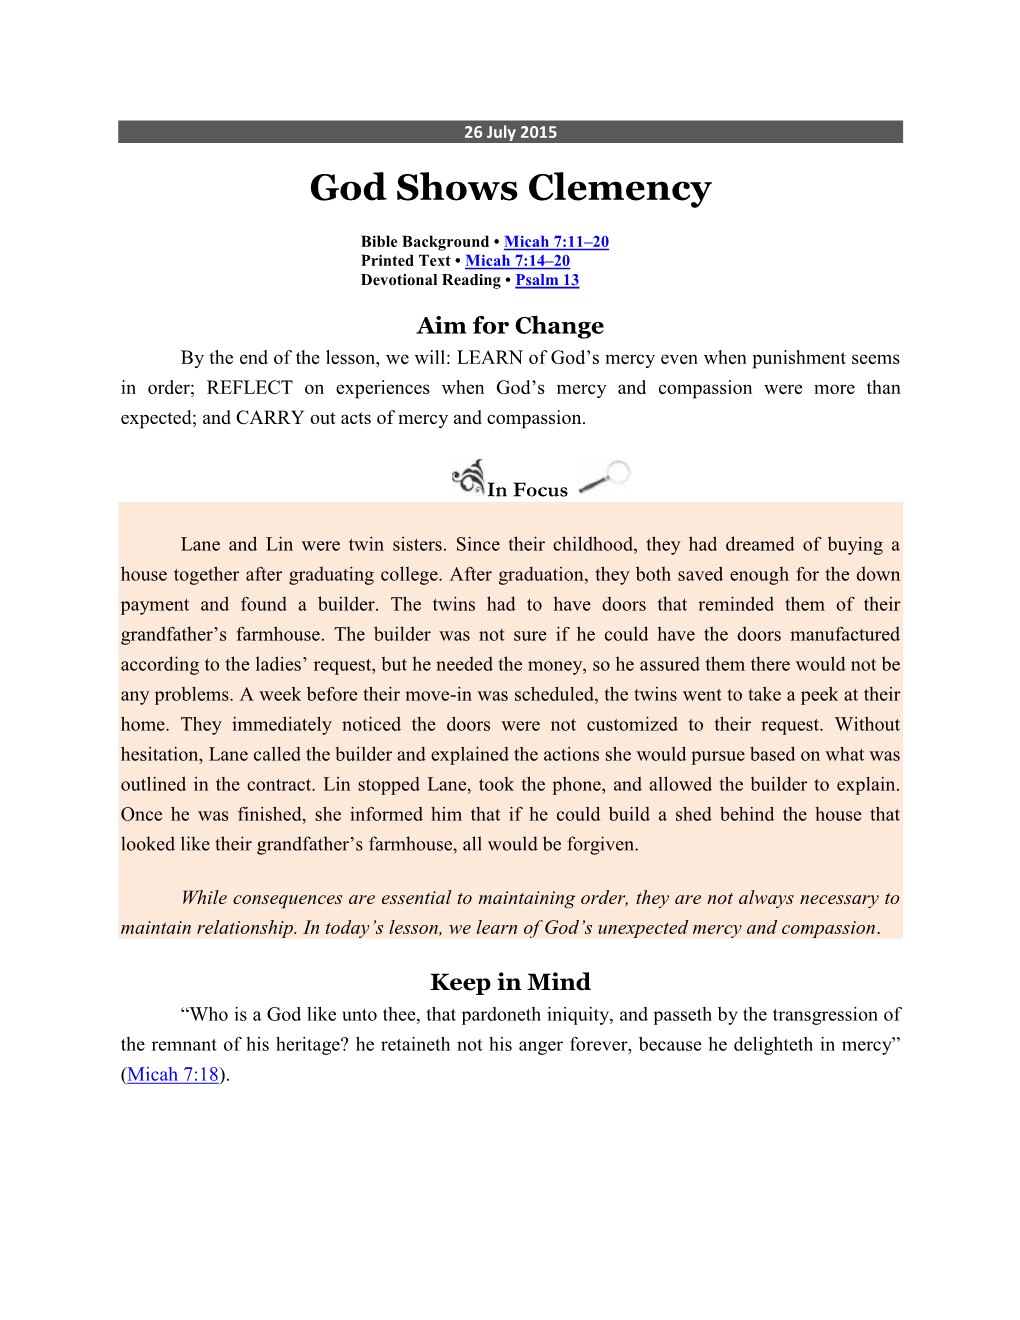 God Shows Clemency